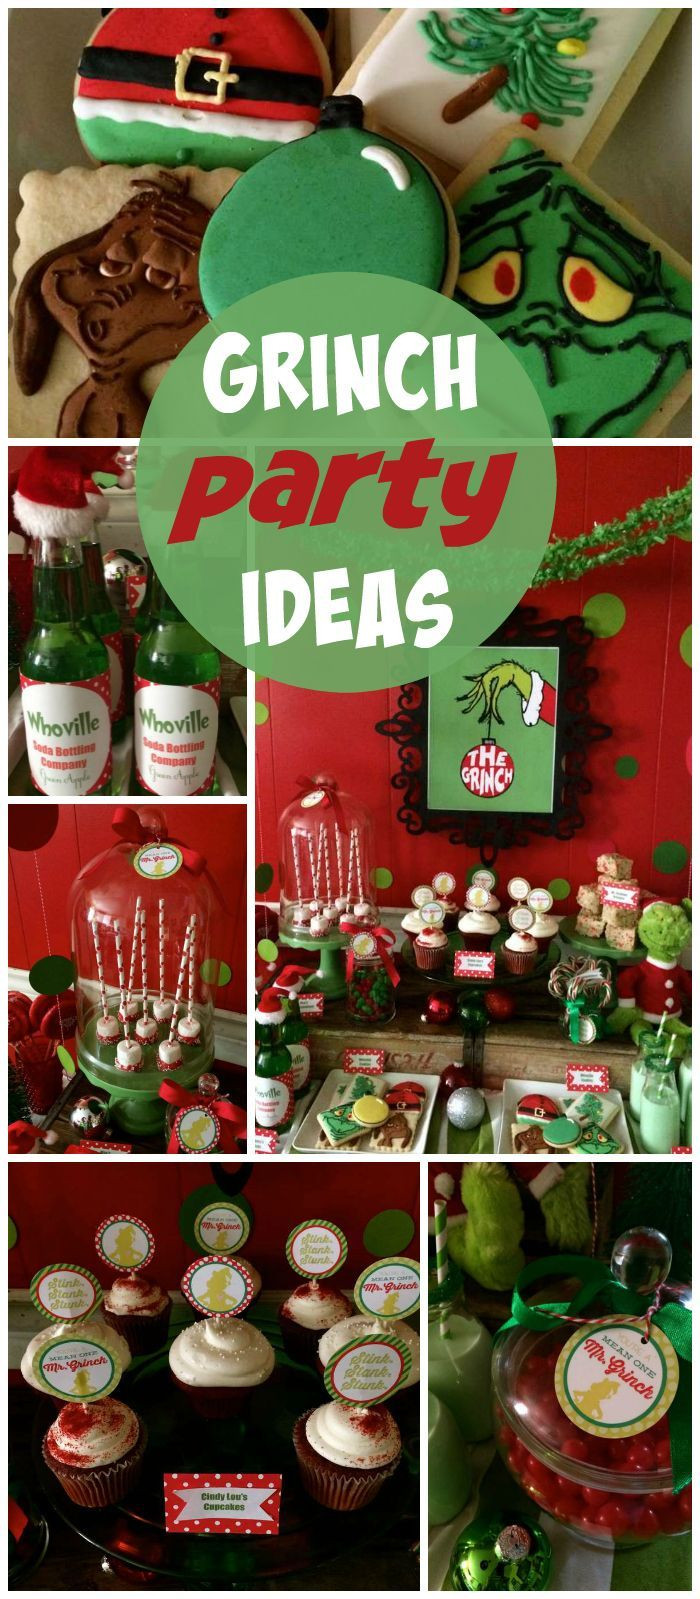 Grinch Christmas Party Ideas
 Pin by Catch My Party on Christmas Ideas